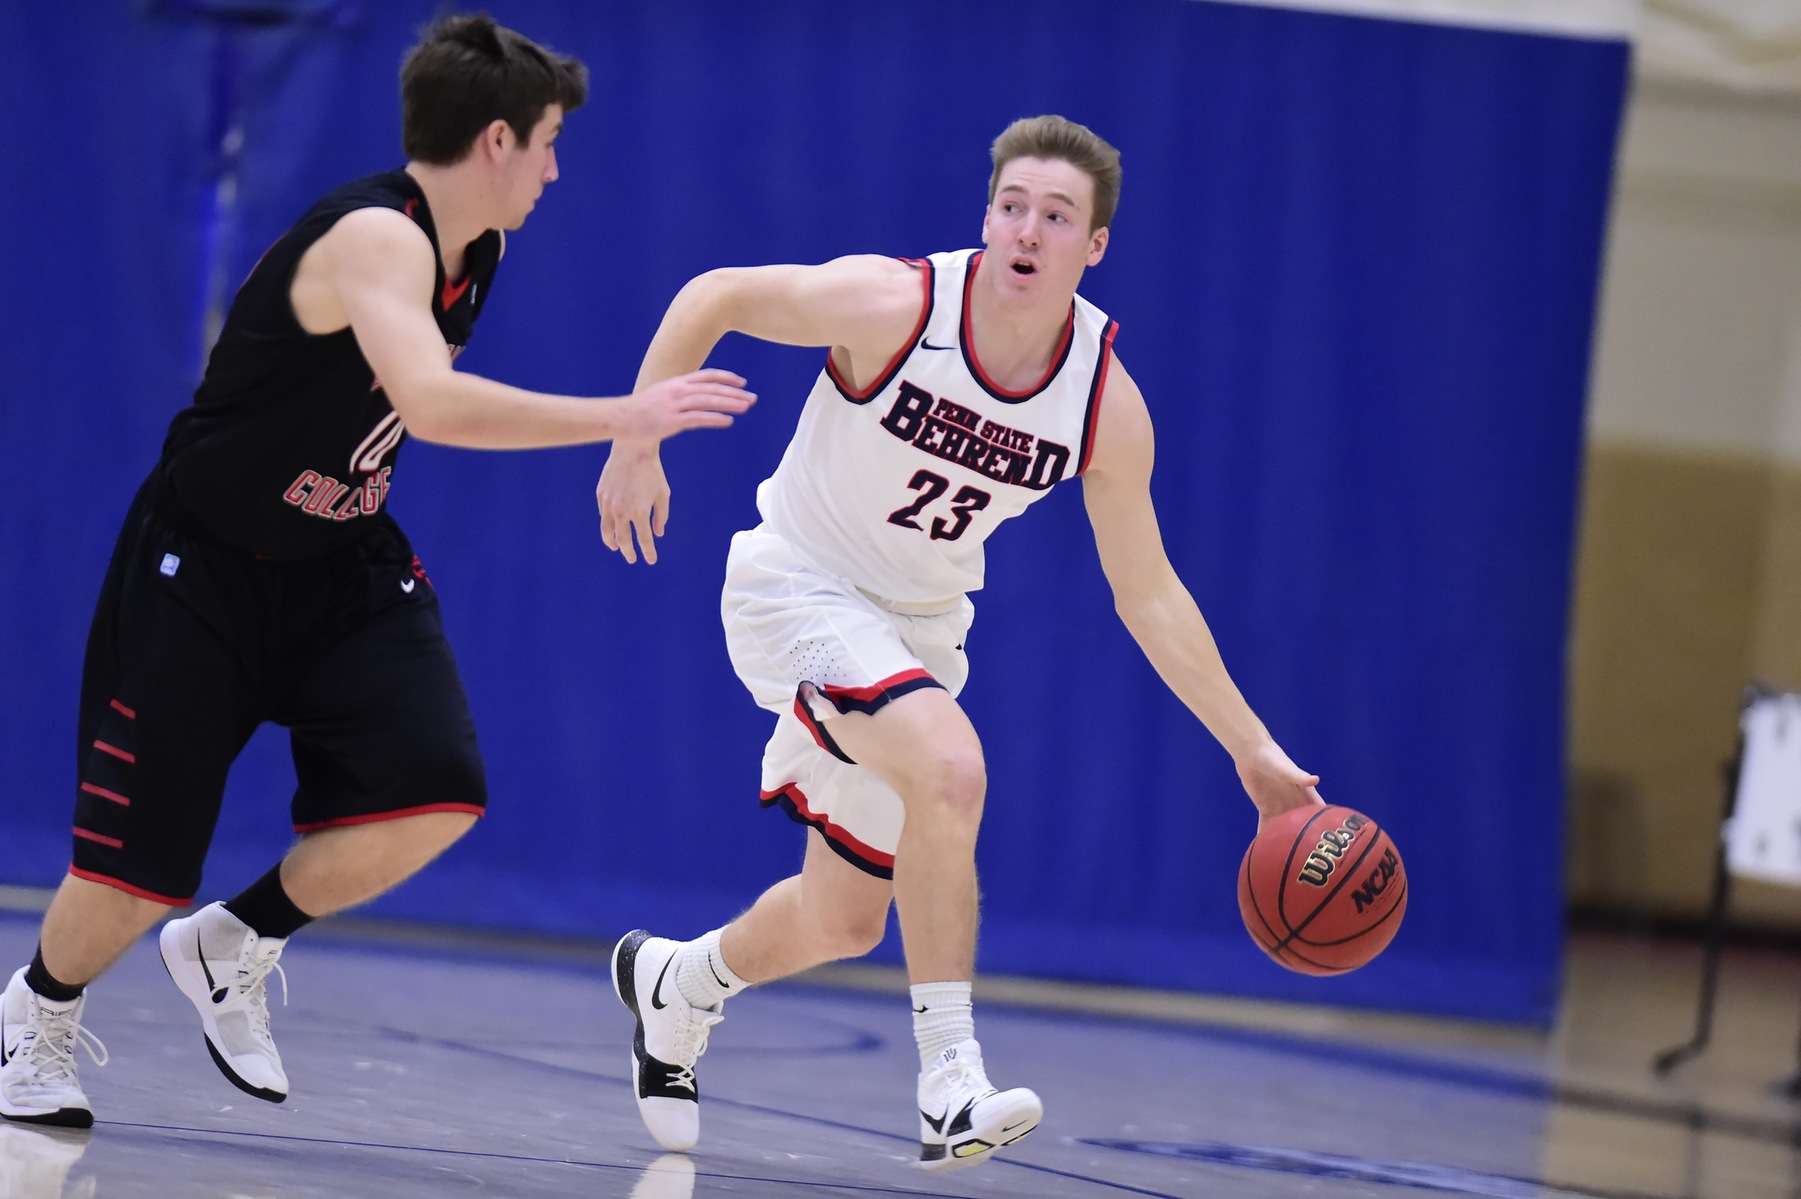 Lions Notch Road Win, Defeating D'Youville 70-51